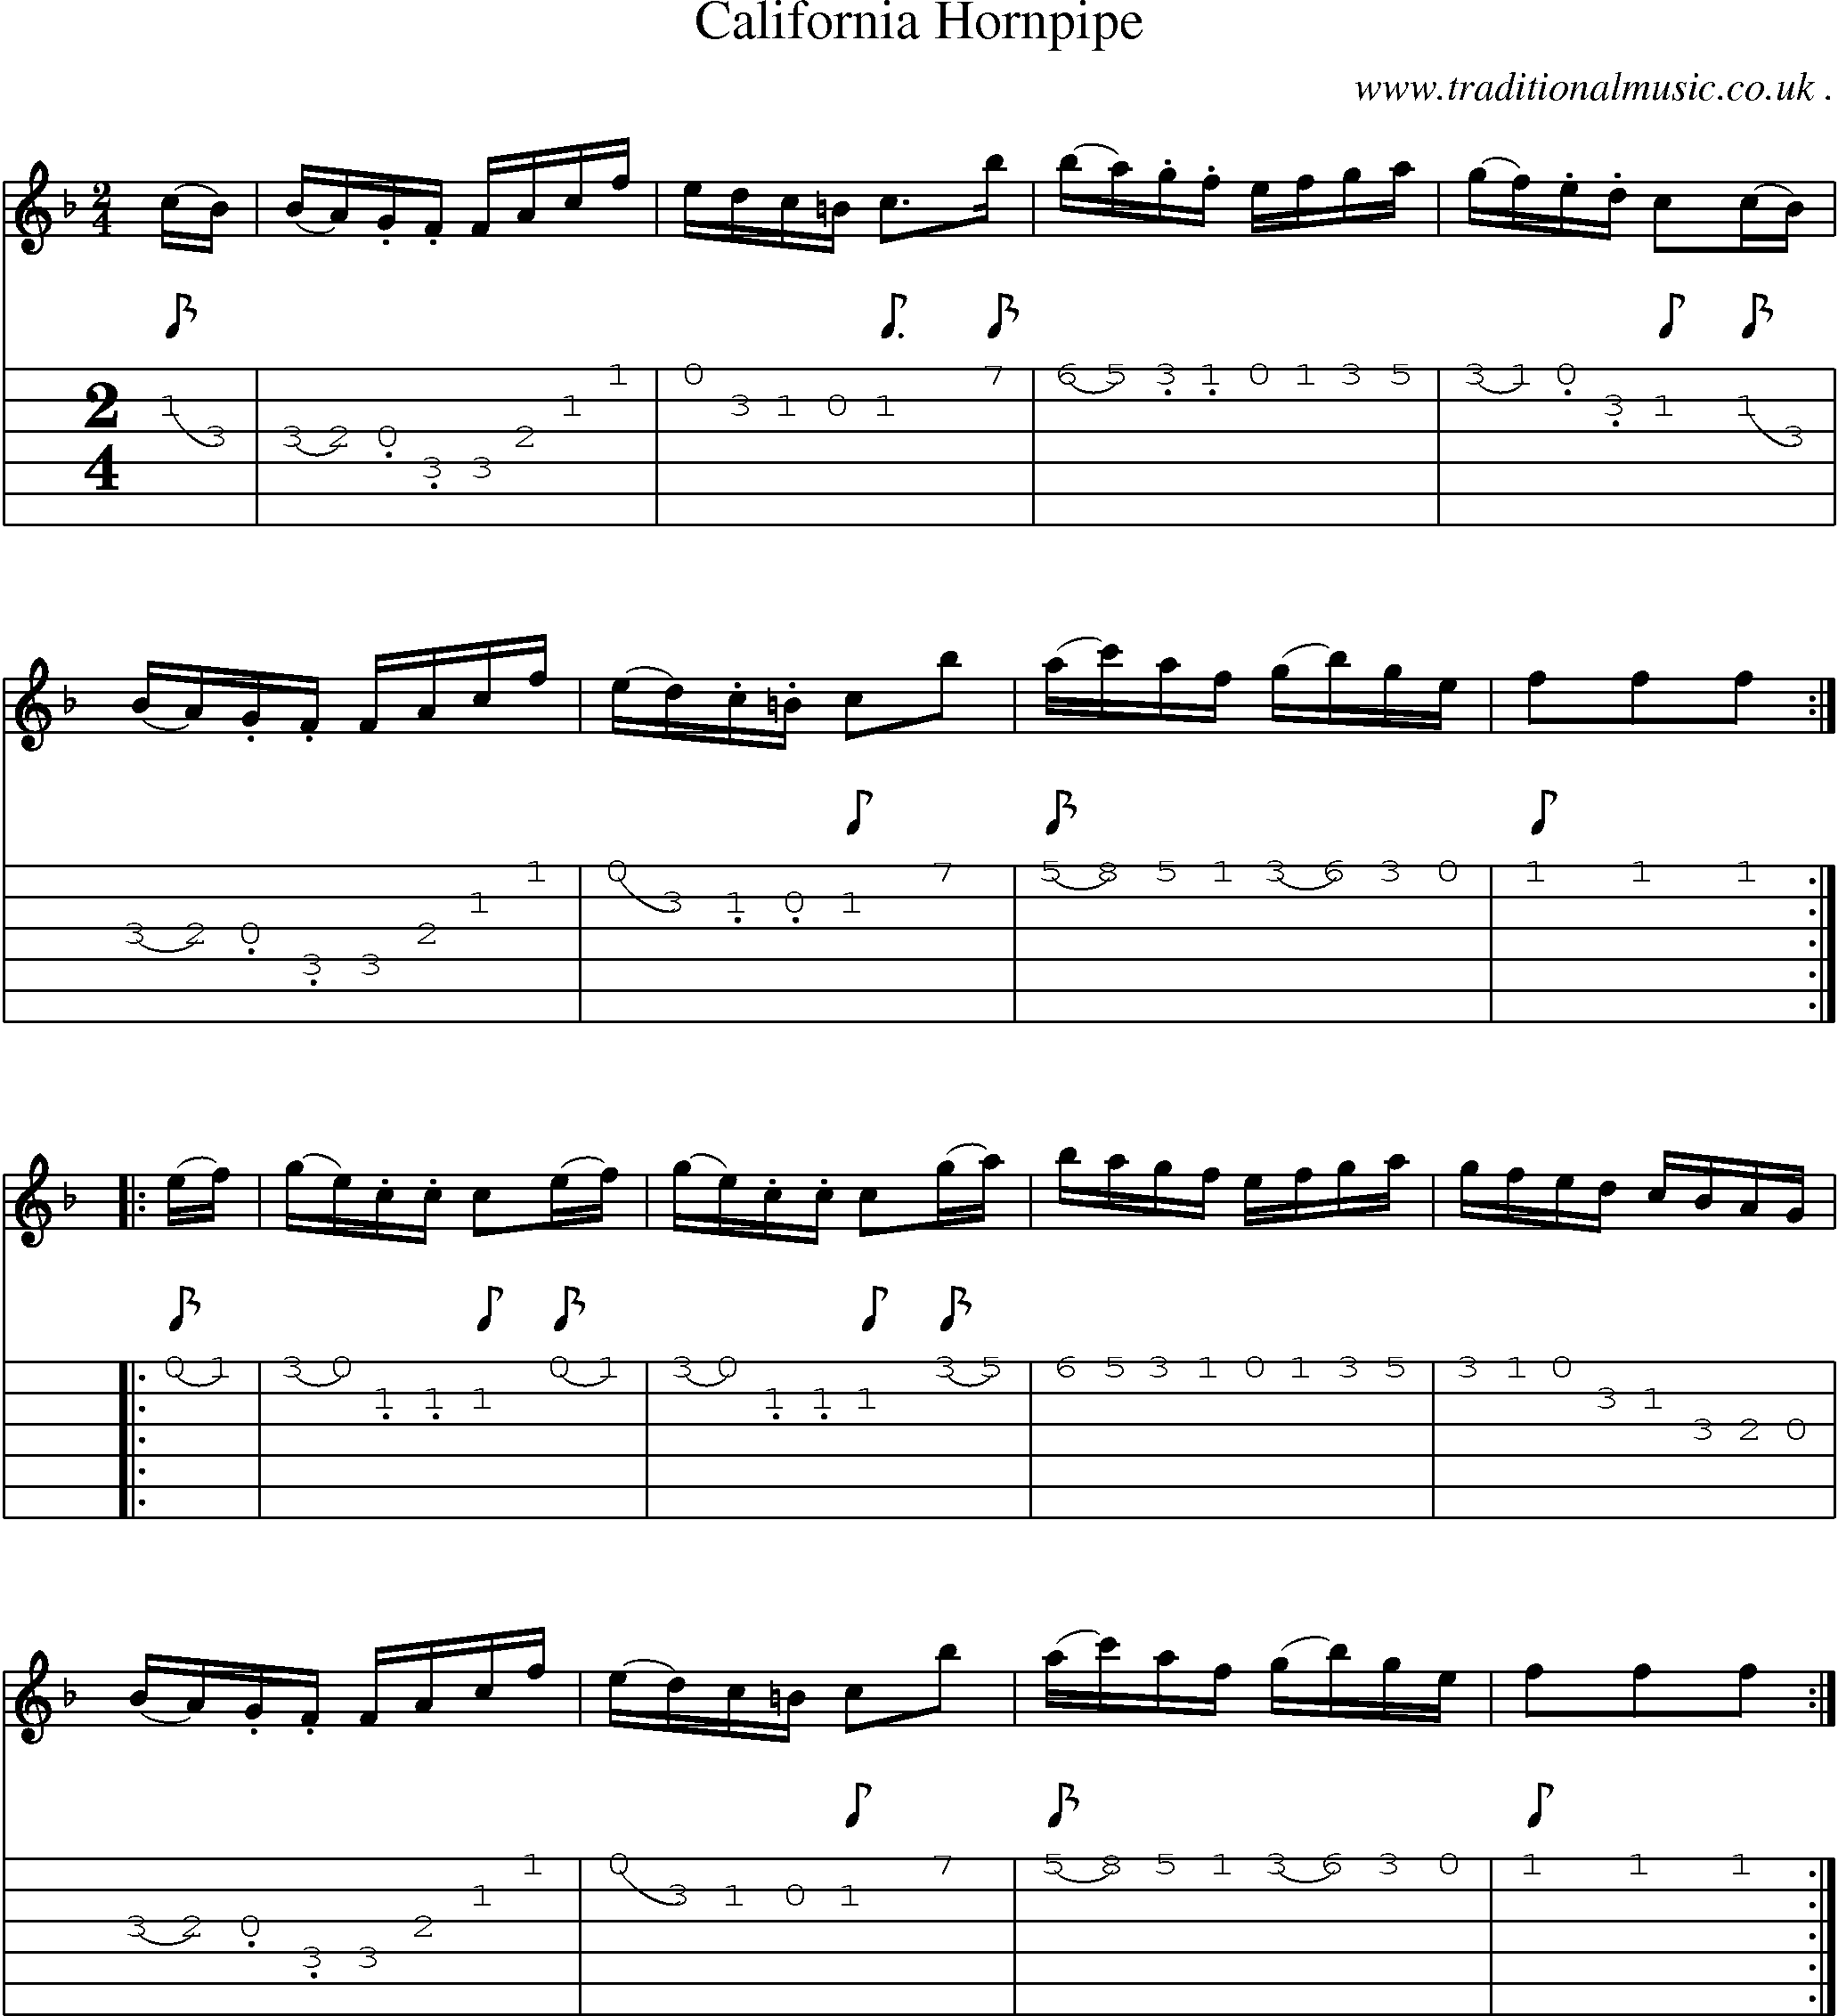 Sheet-Music and Guitar Tabs for California Hornpipe